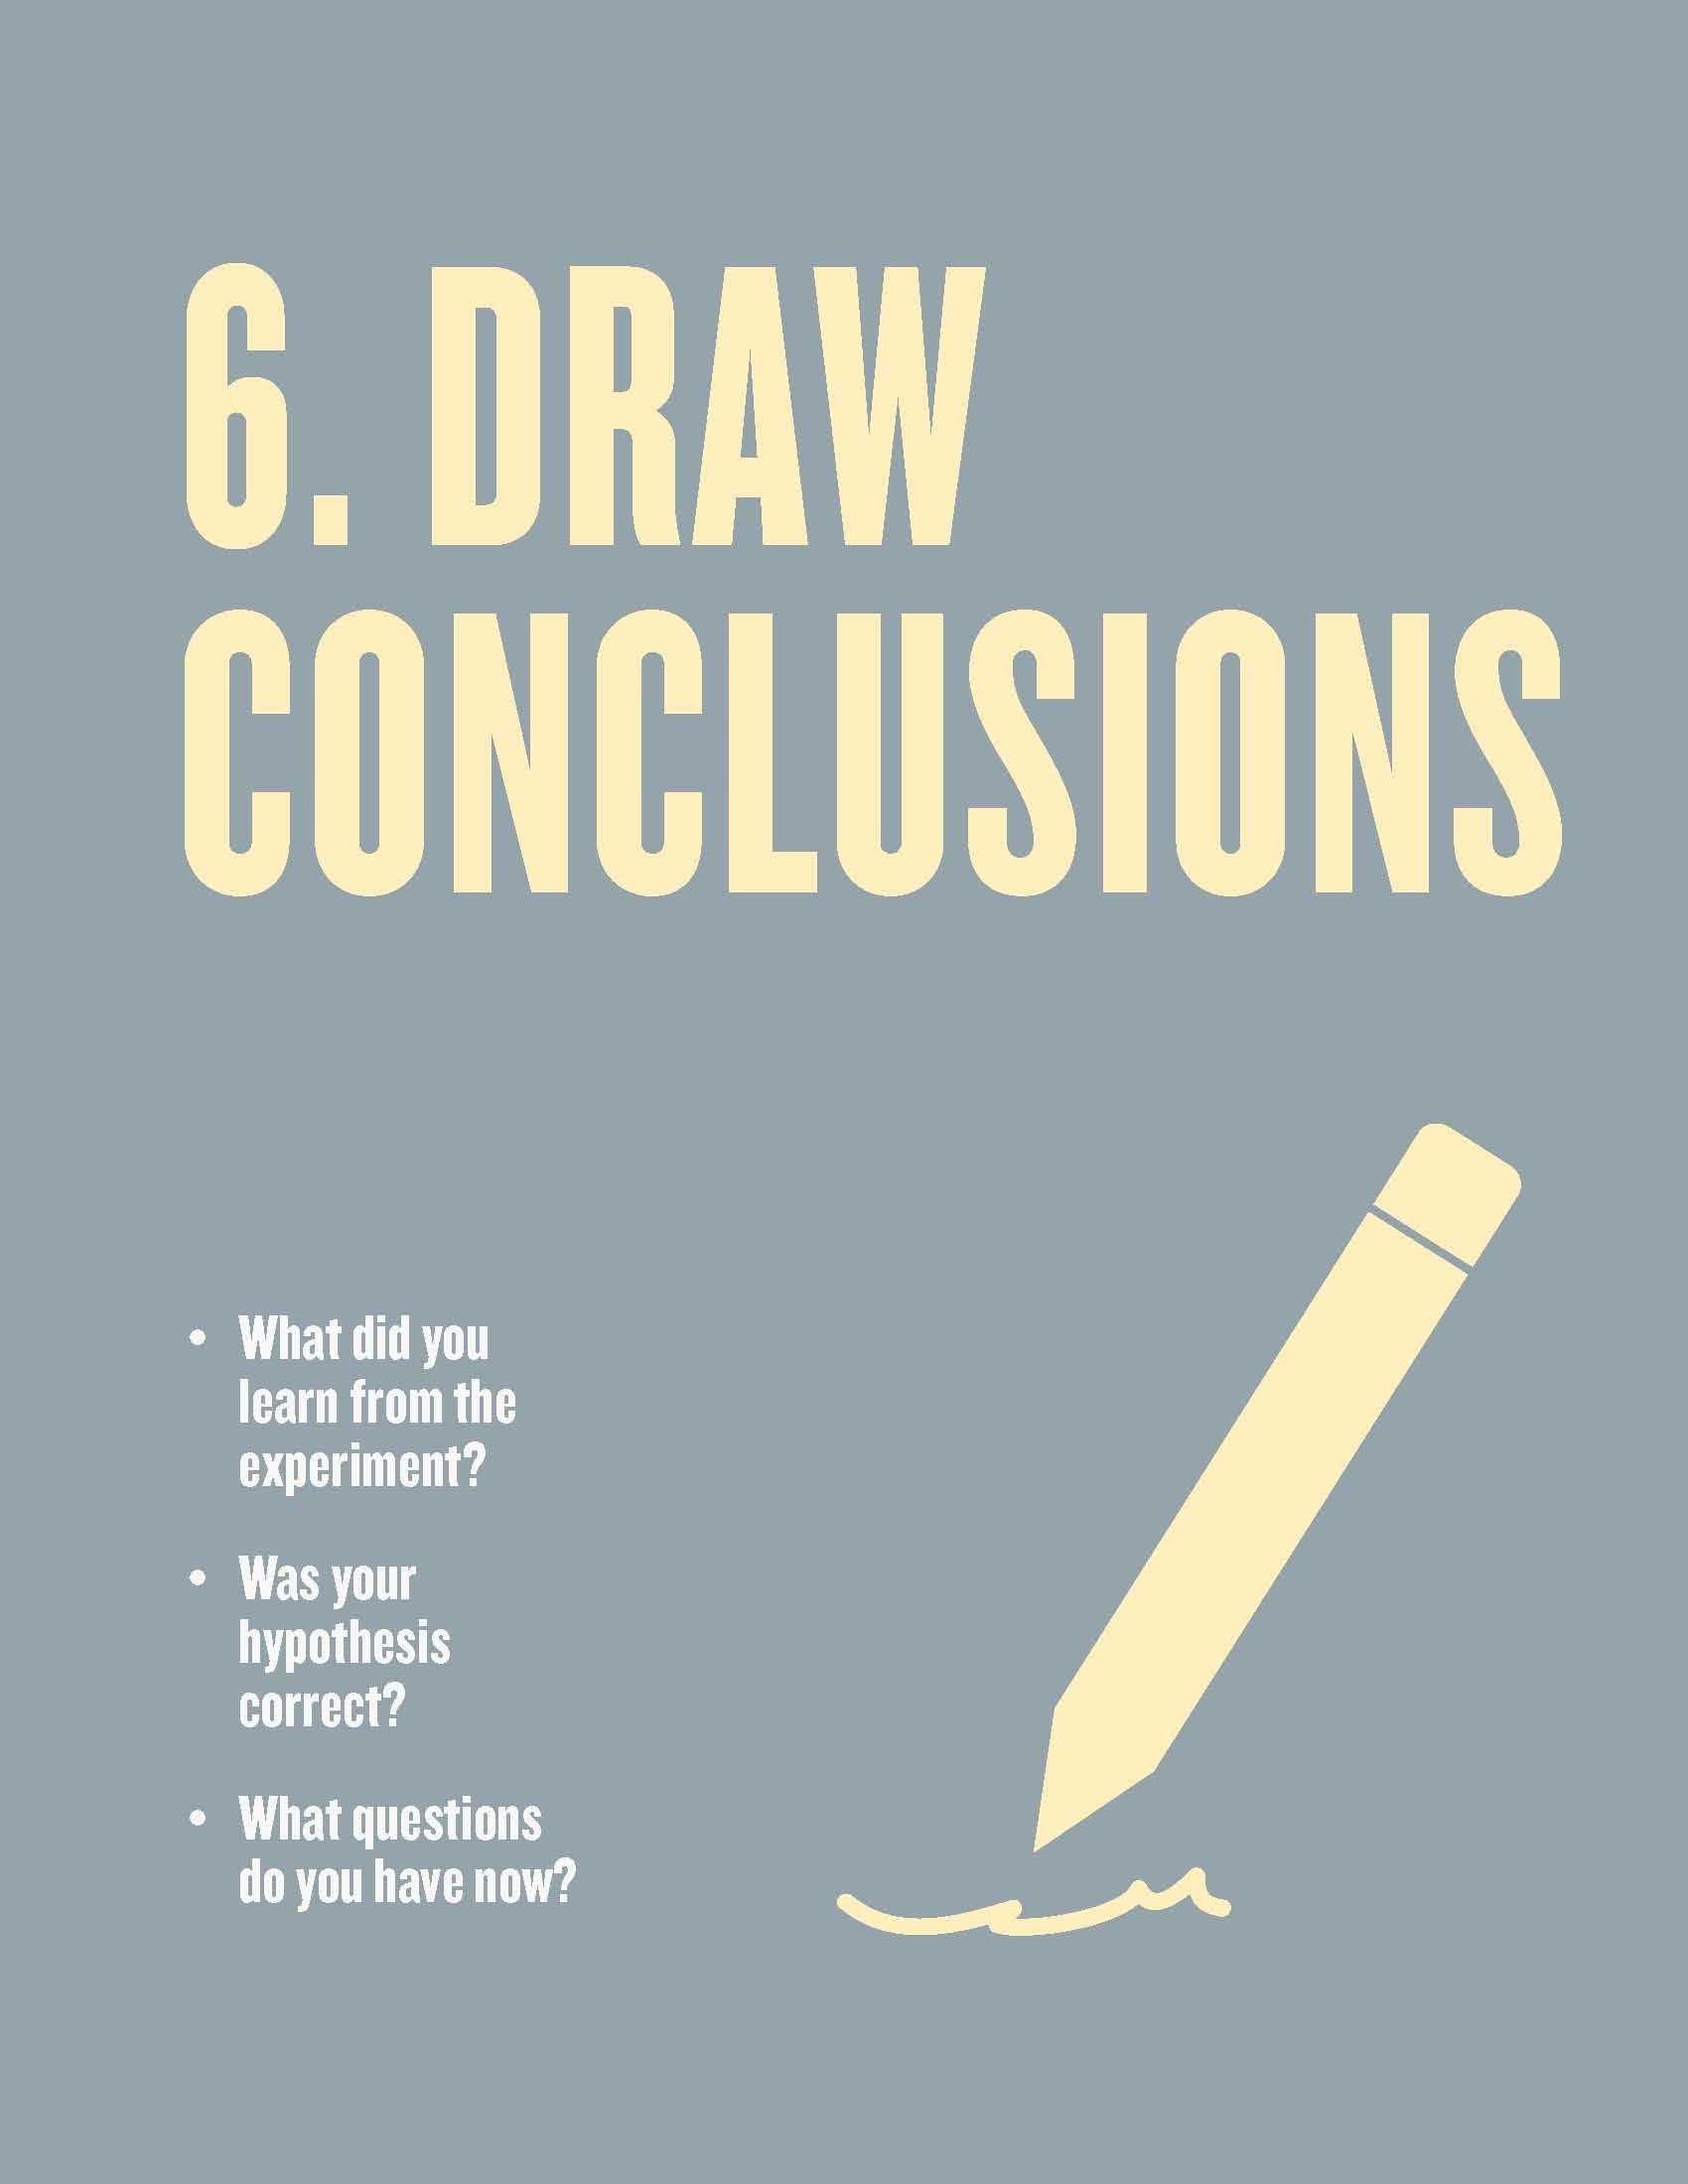 Scientific Inquiry Worksheet Answers Also Free Scientific Method Posters for the Classroom Step 6 Draw